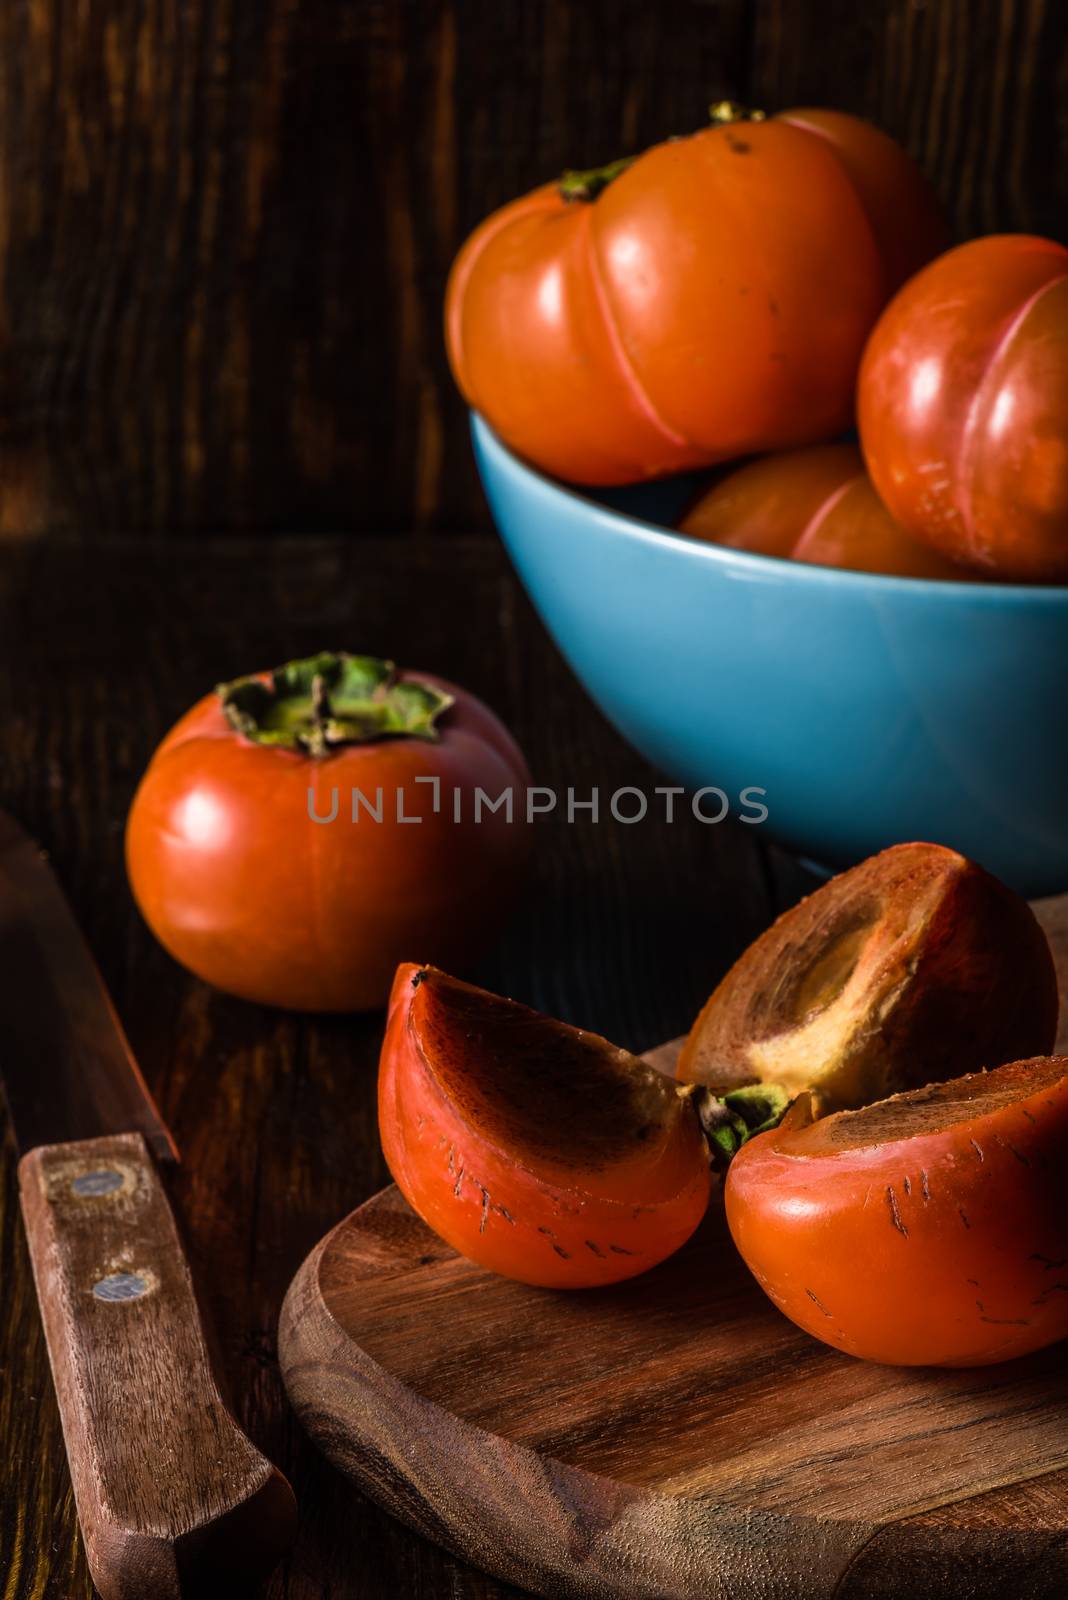 Sliced Persimmon for Three with Knife and Some Fruits in Blue Bowl on Background. Vertical.